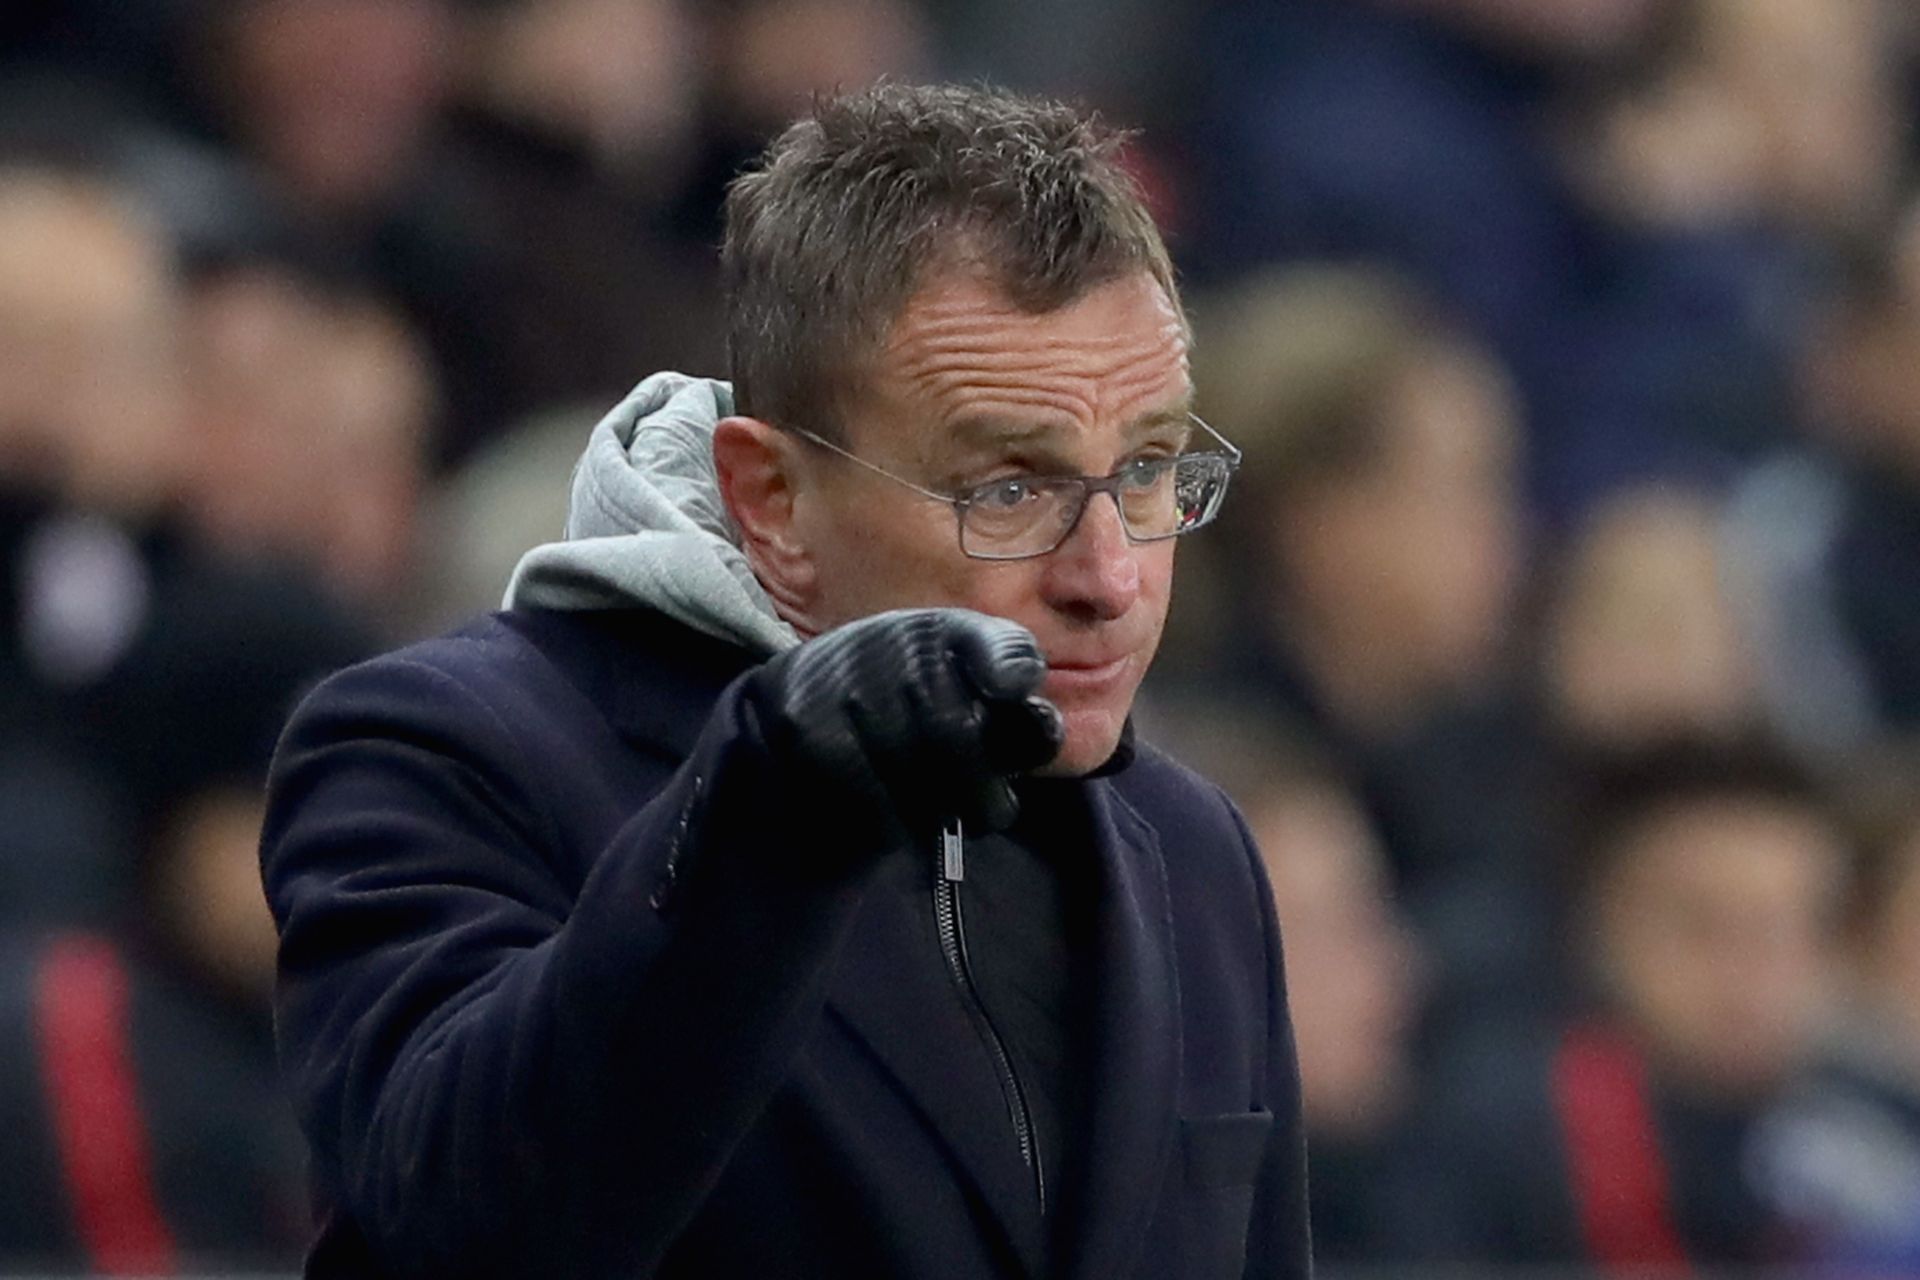 German manager Ralf Rangnick is set to take over at Manchester United.